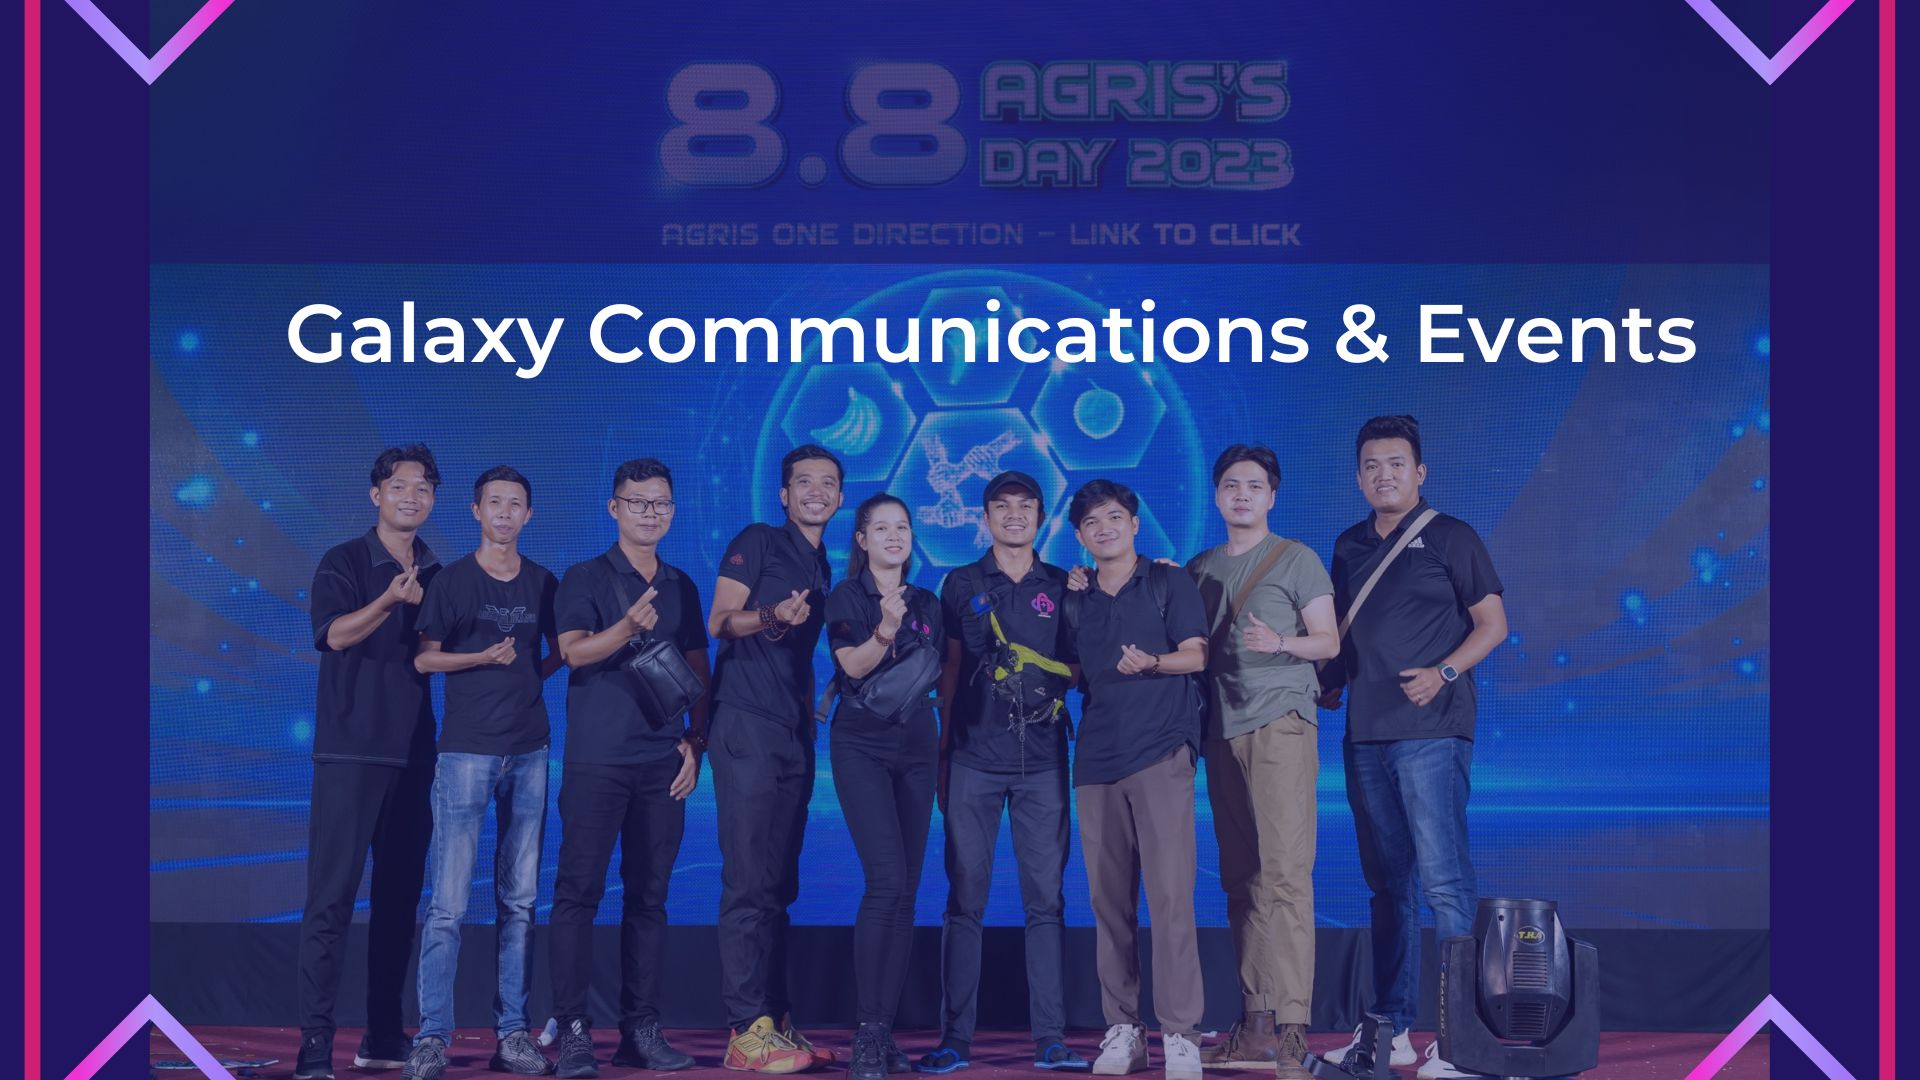 GALAXY COMMUNICATIONS & EVENTS